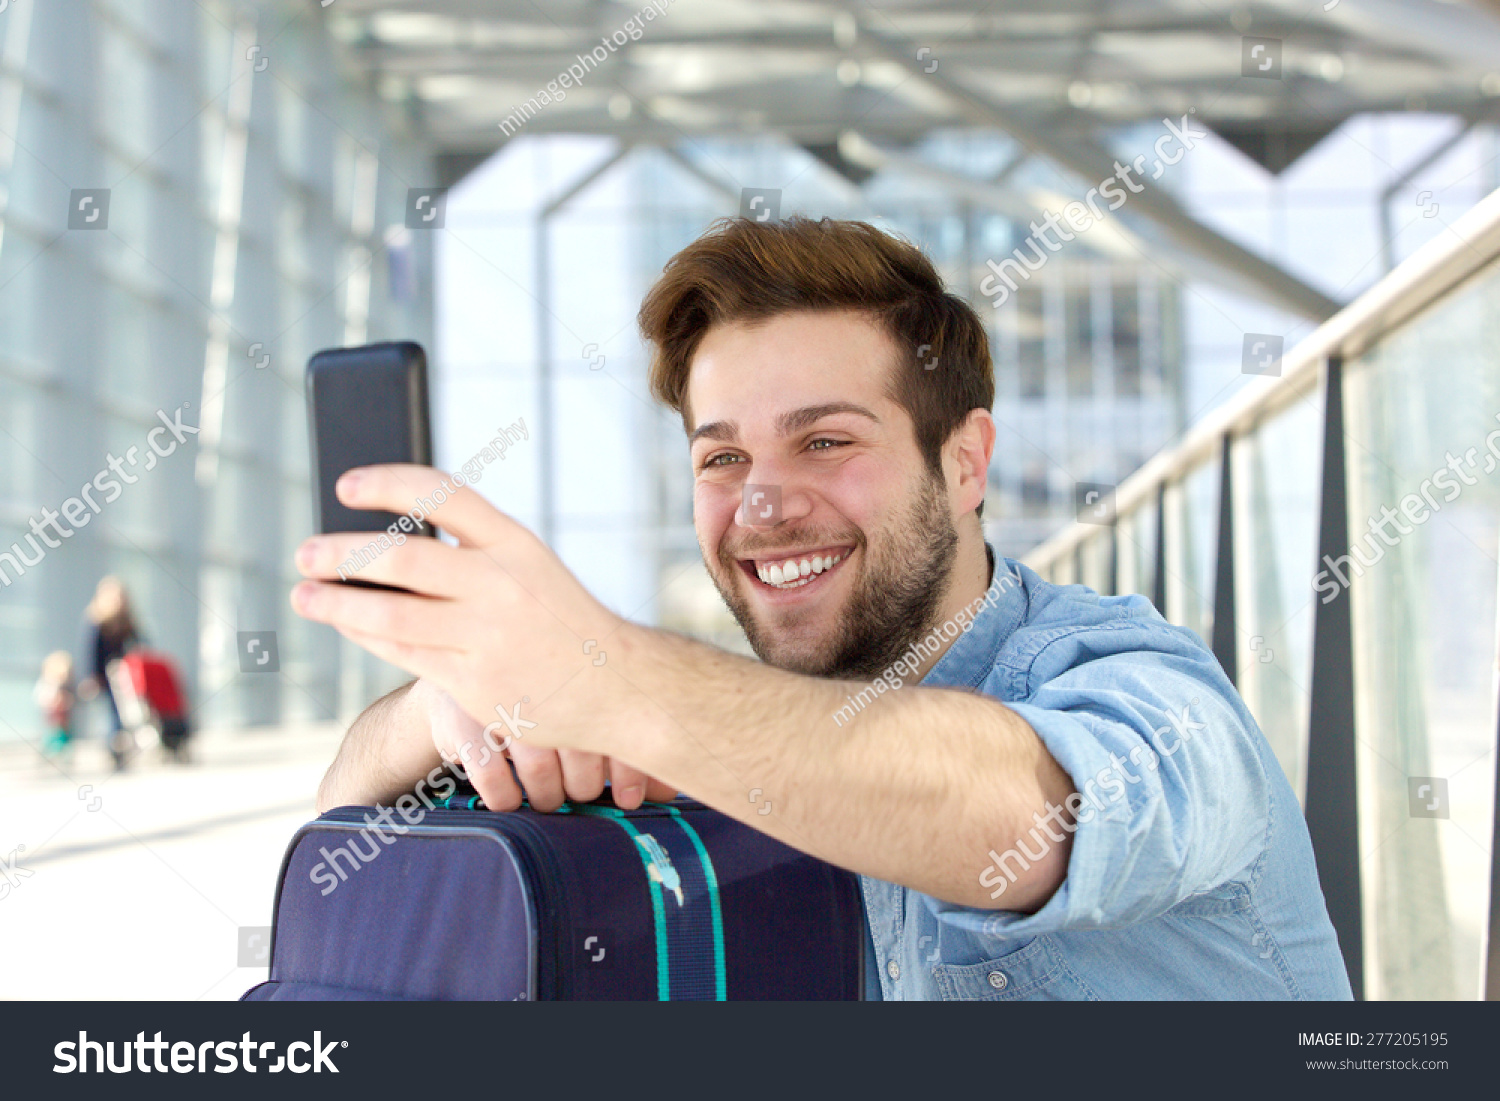 Portrait of a young man laughing and taking selfie #277205195